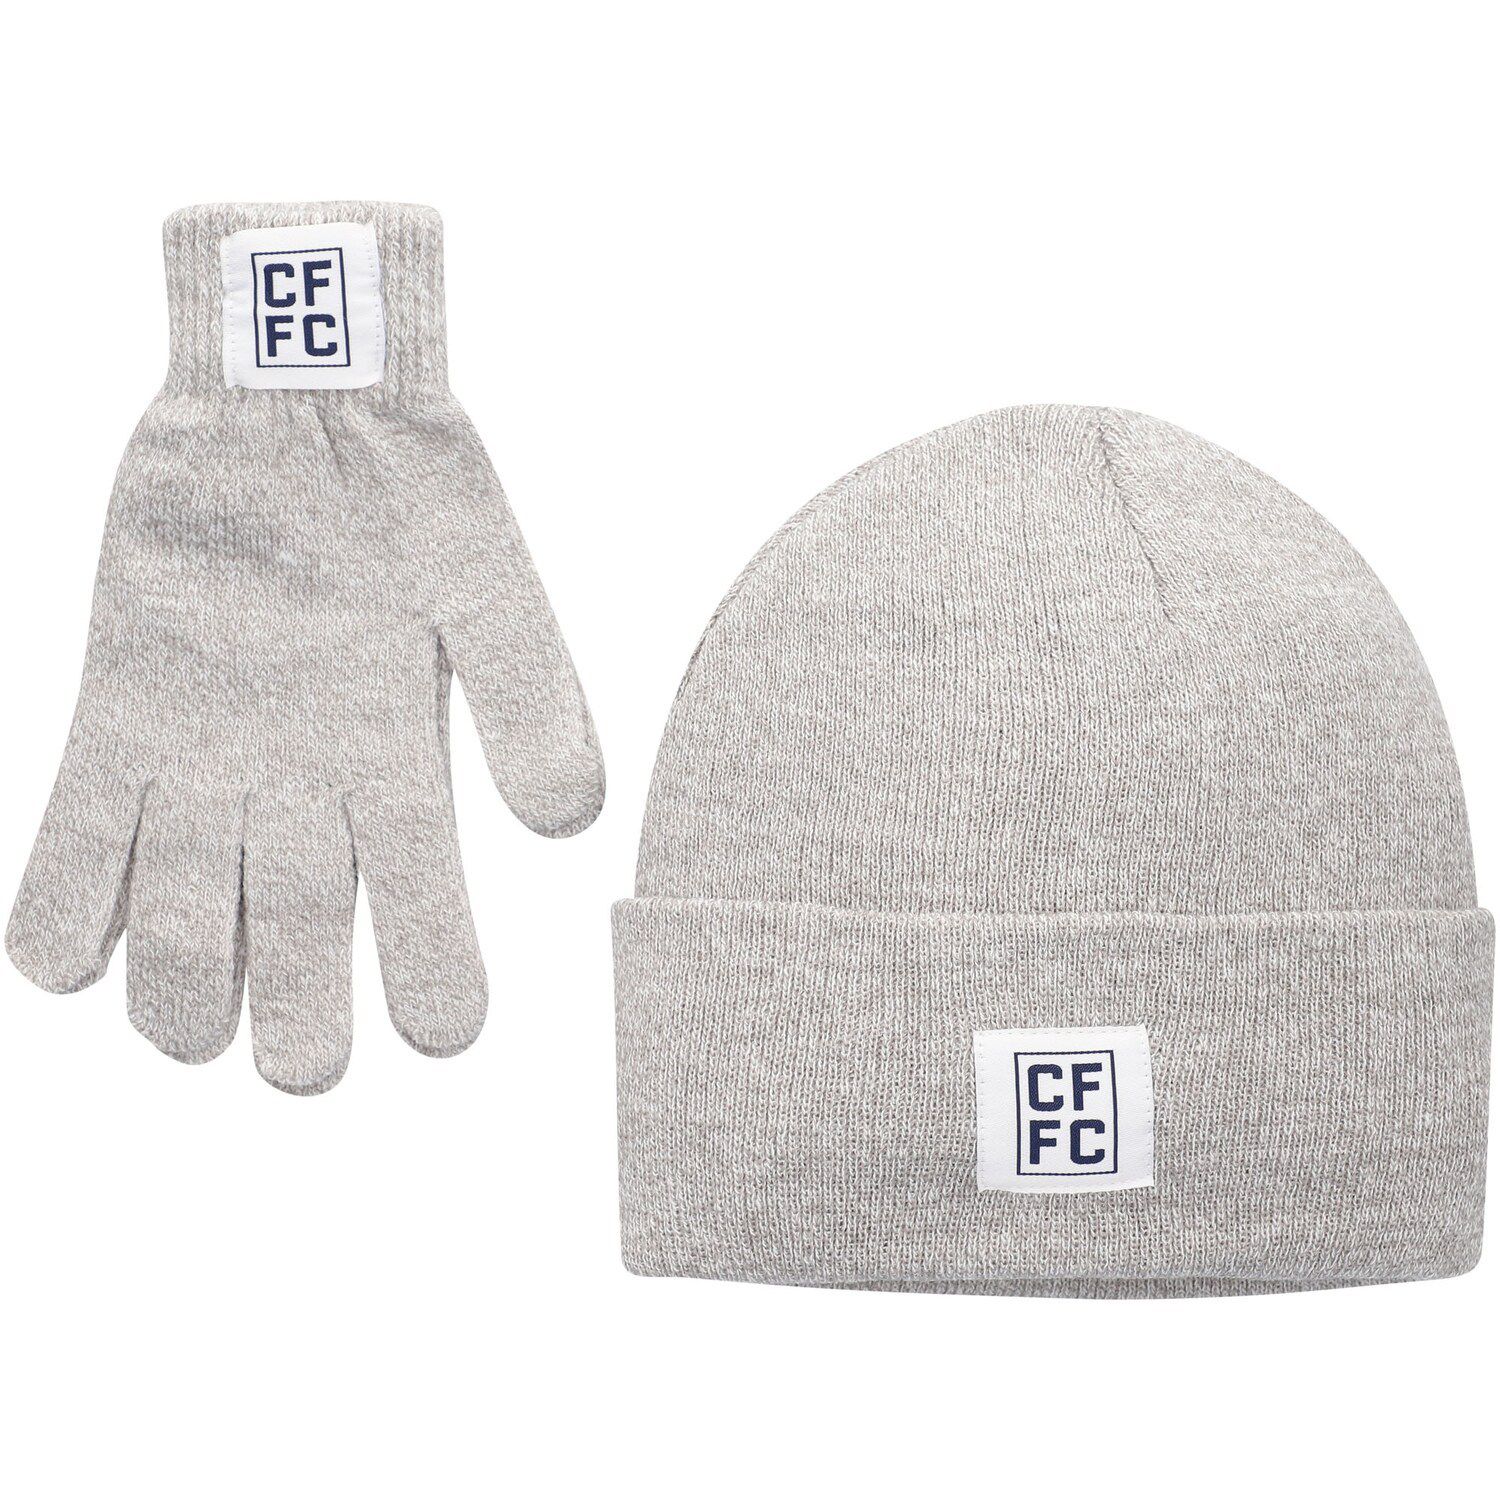 Image for Unbranded Women's ZooZatz Heathered Gray Chicago Fire Cuffed Knit Hat & Gloves Set at Kohl's.